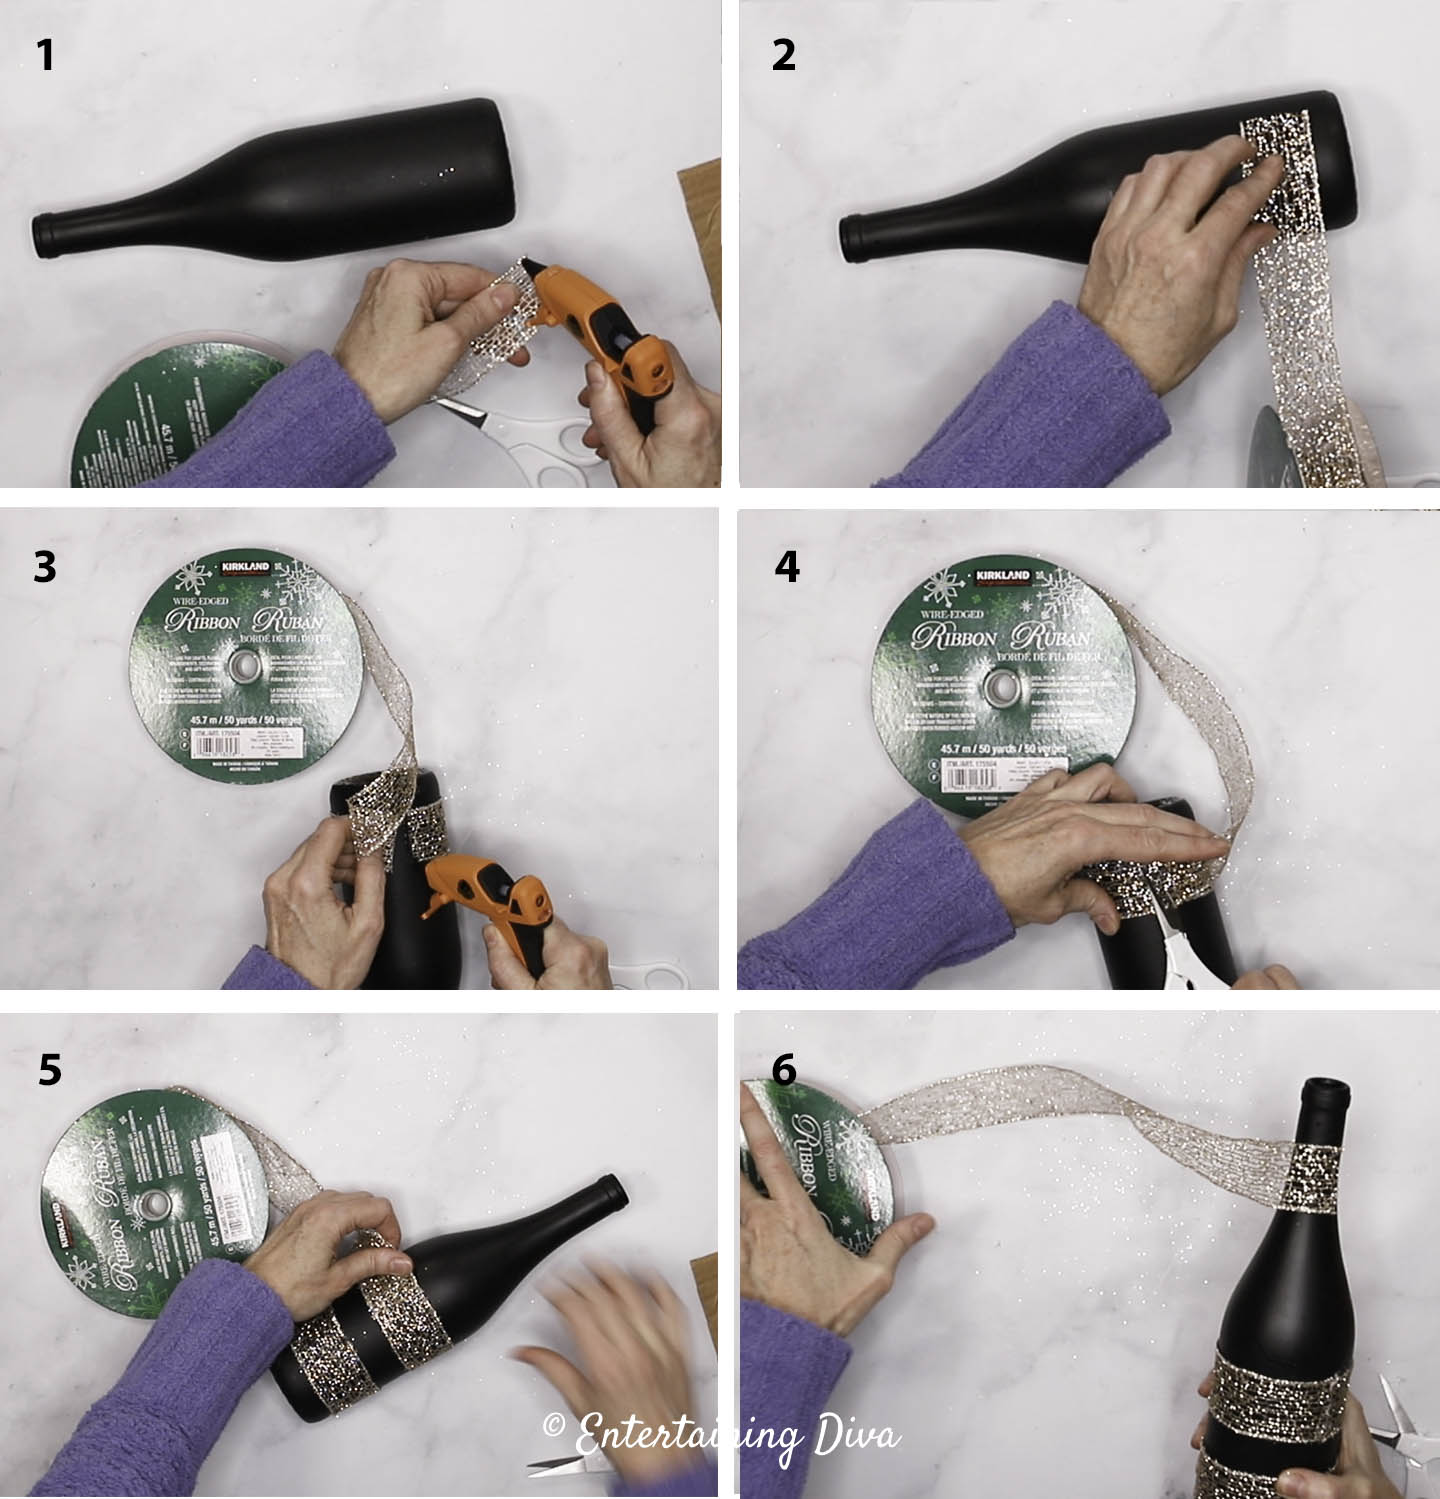 Overview of the steps to decorate a black wine bottle with gold mesh ribbon